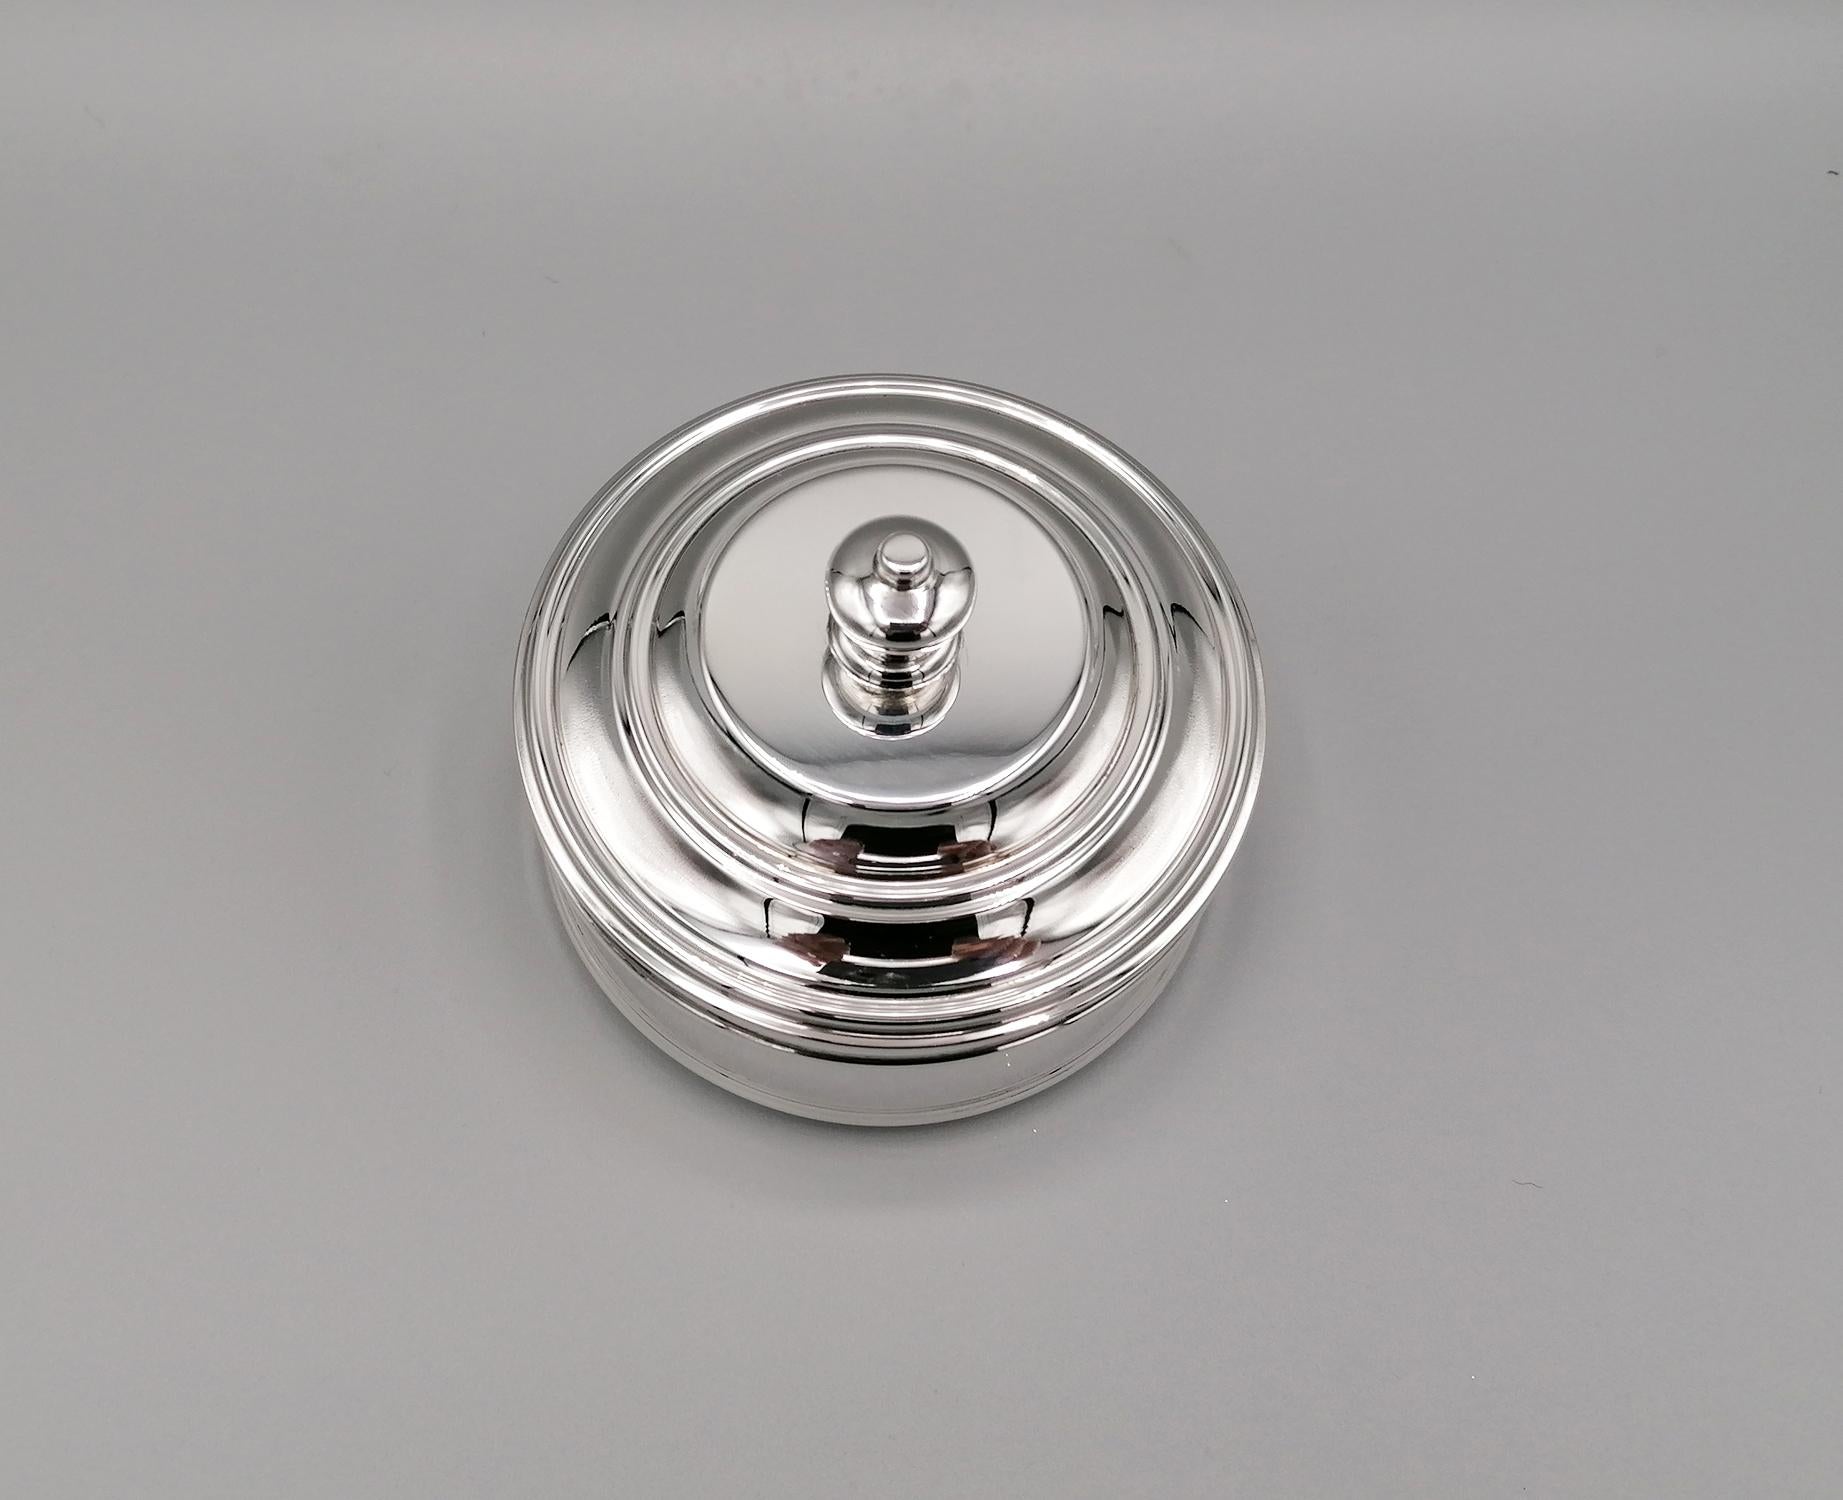 Round shape sterling silver jewelry box. The simplicity of the forms and the harmony of the proportions make it suitable for all settings.
The lid of the jewelry box has a knob handle while the interior is lined with a precious blue fabric with a